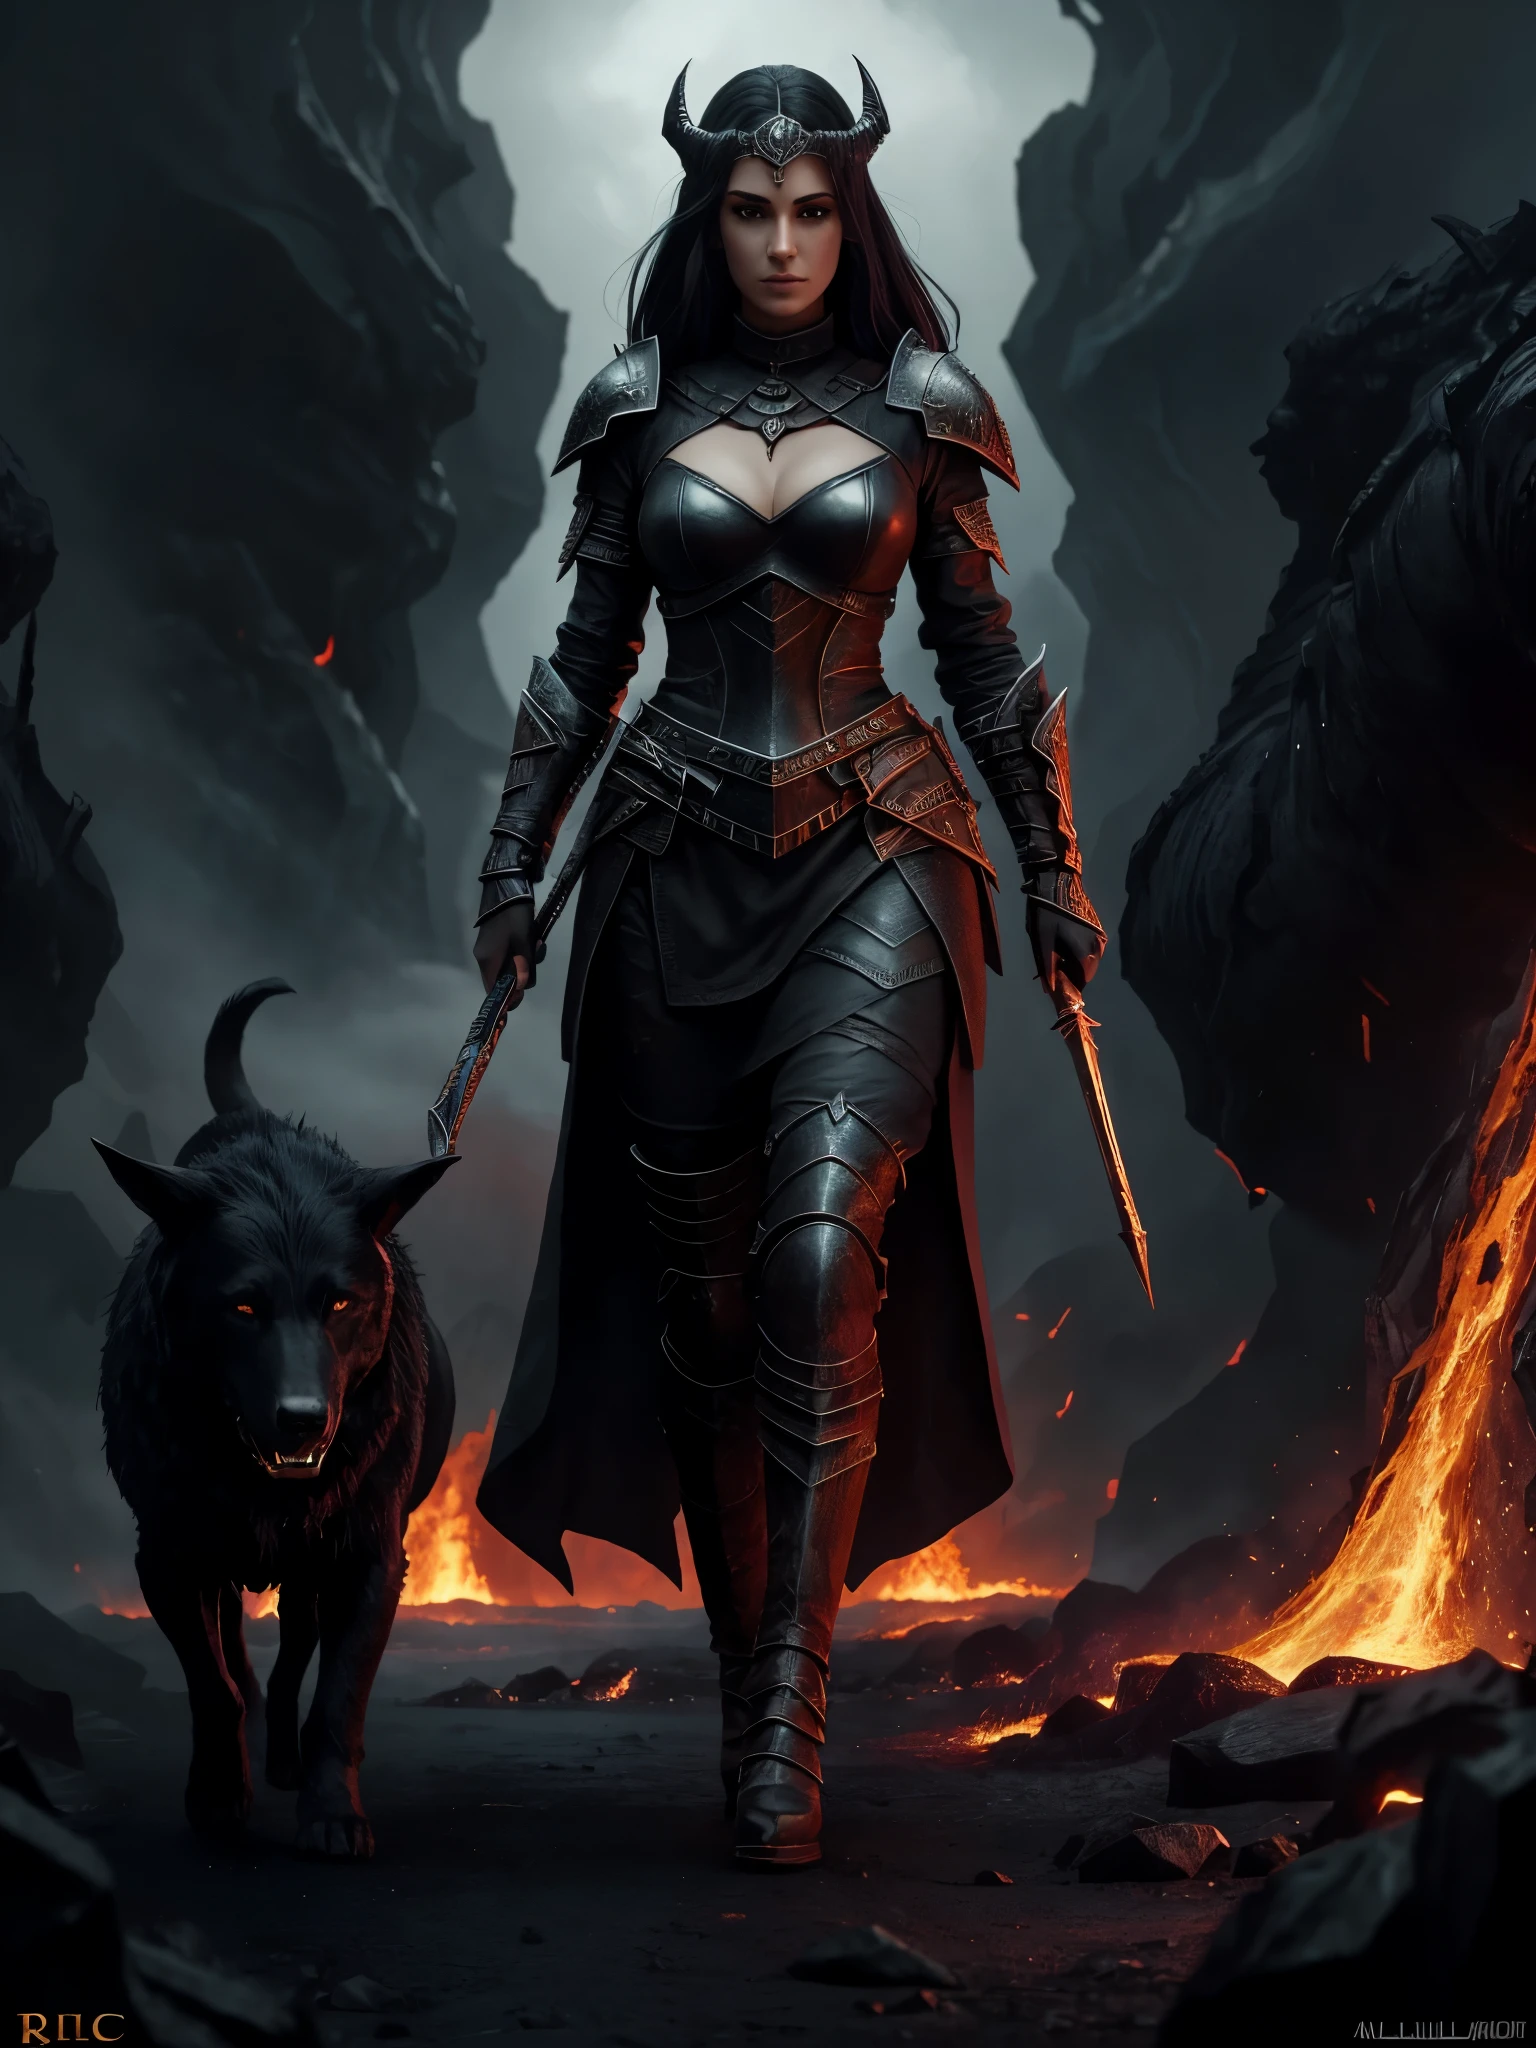 arafed woman in black plunge neck leather outfit walking through a lava field with a large black hell hound by her side, in style of dark fantasy art, epic fantasy digital art style, diablo 4 lilith, epic fantasy art style hd, 4k fantasy art, epic fantasy digital art, epic fantasy character art, a very beautiful berserker woman, of a beautiful female knight, beautiful female warrior, epic fantasy art style